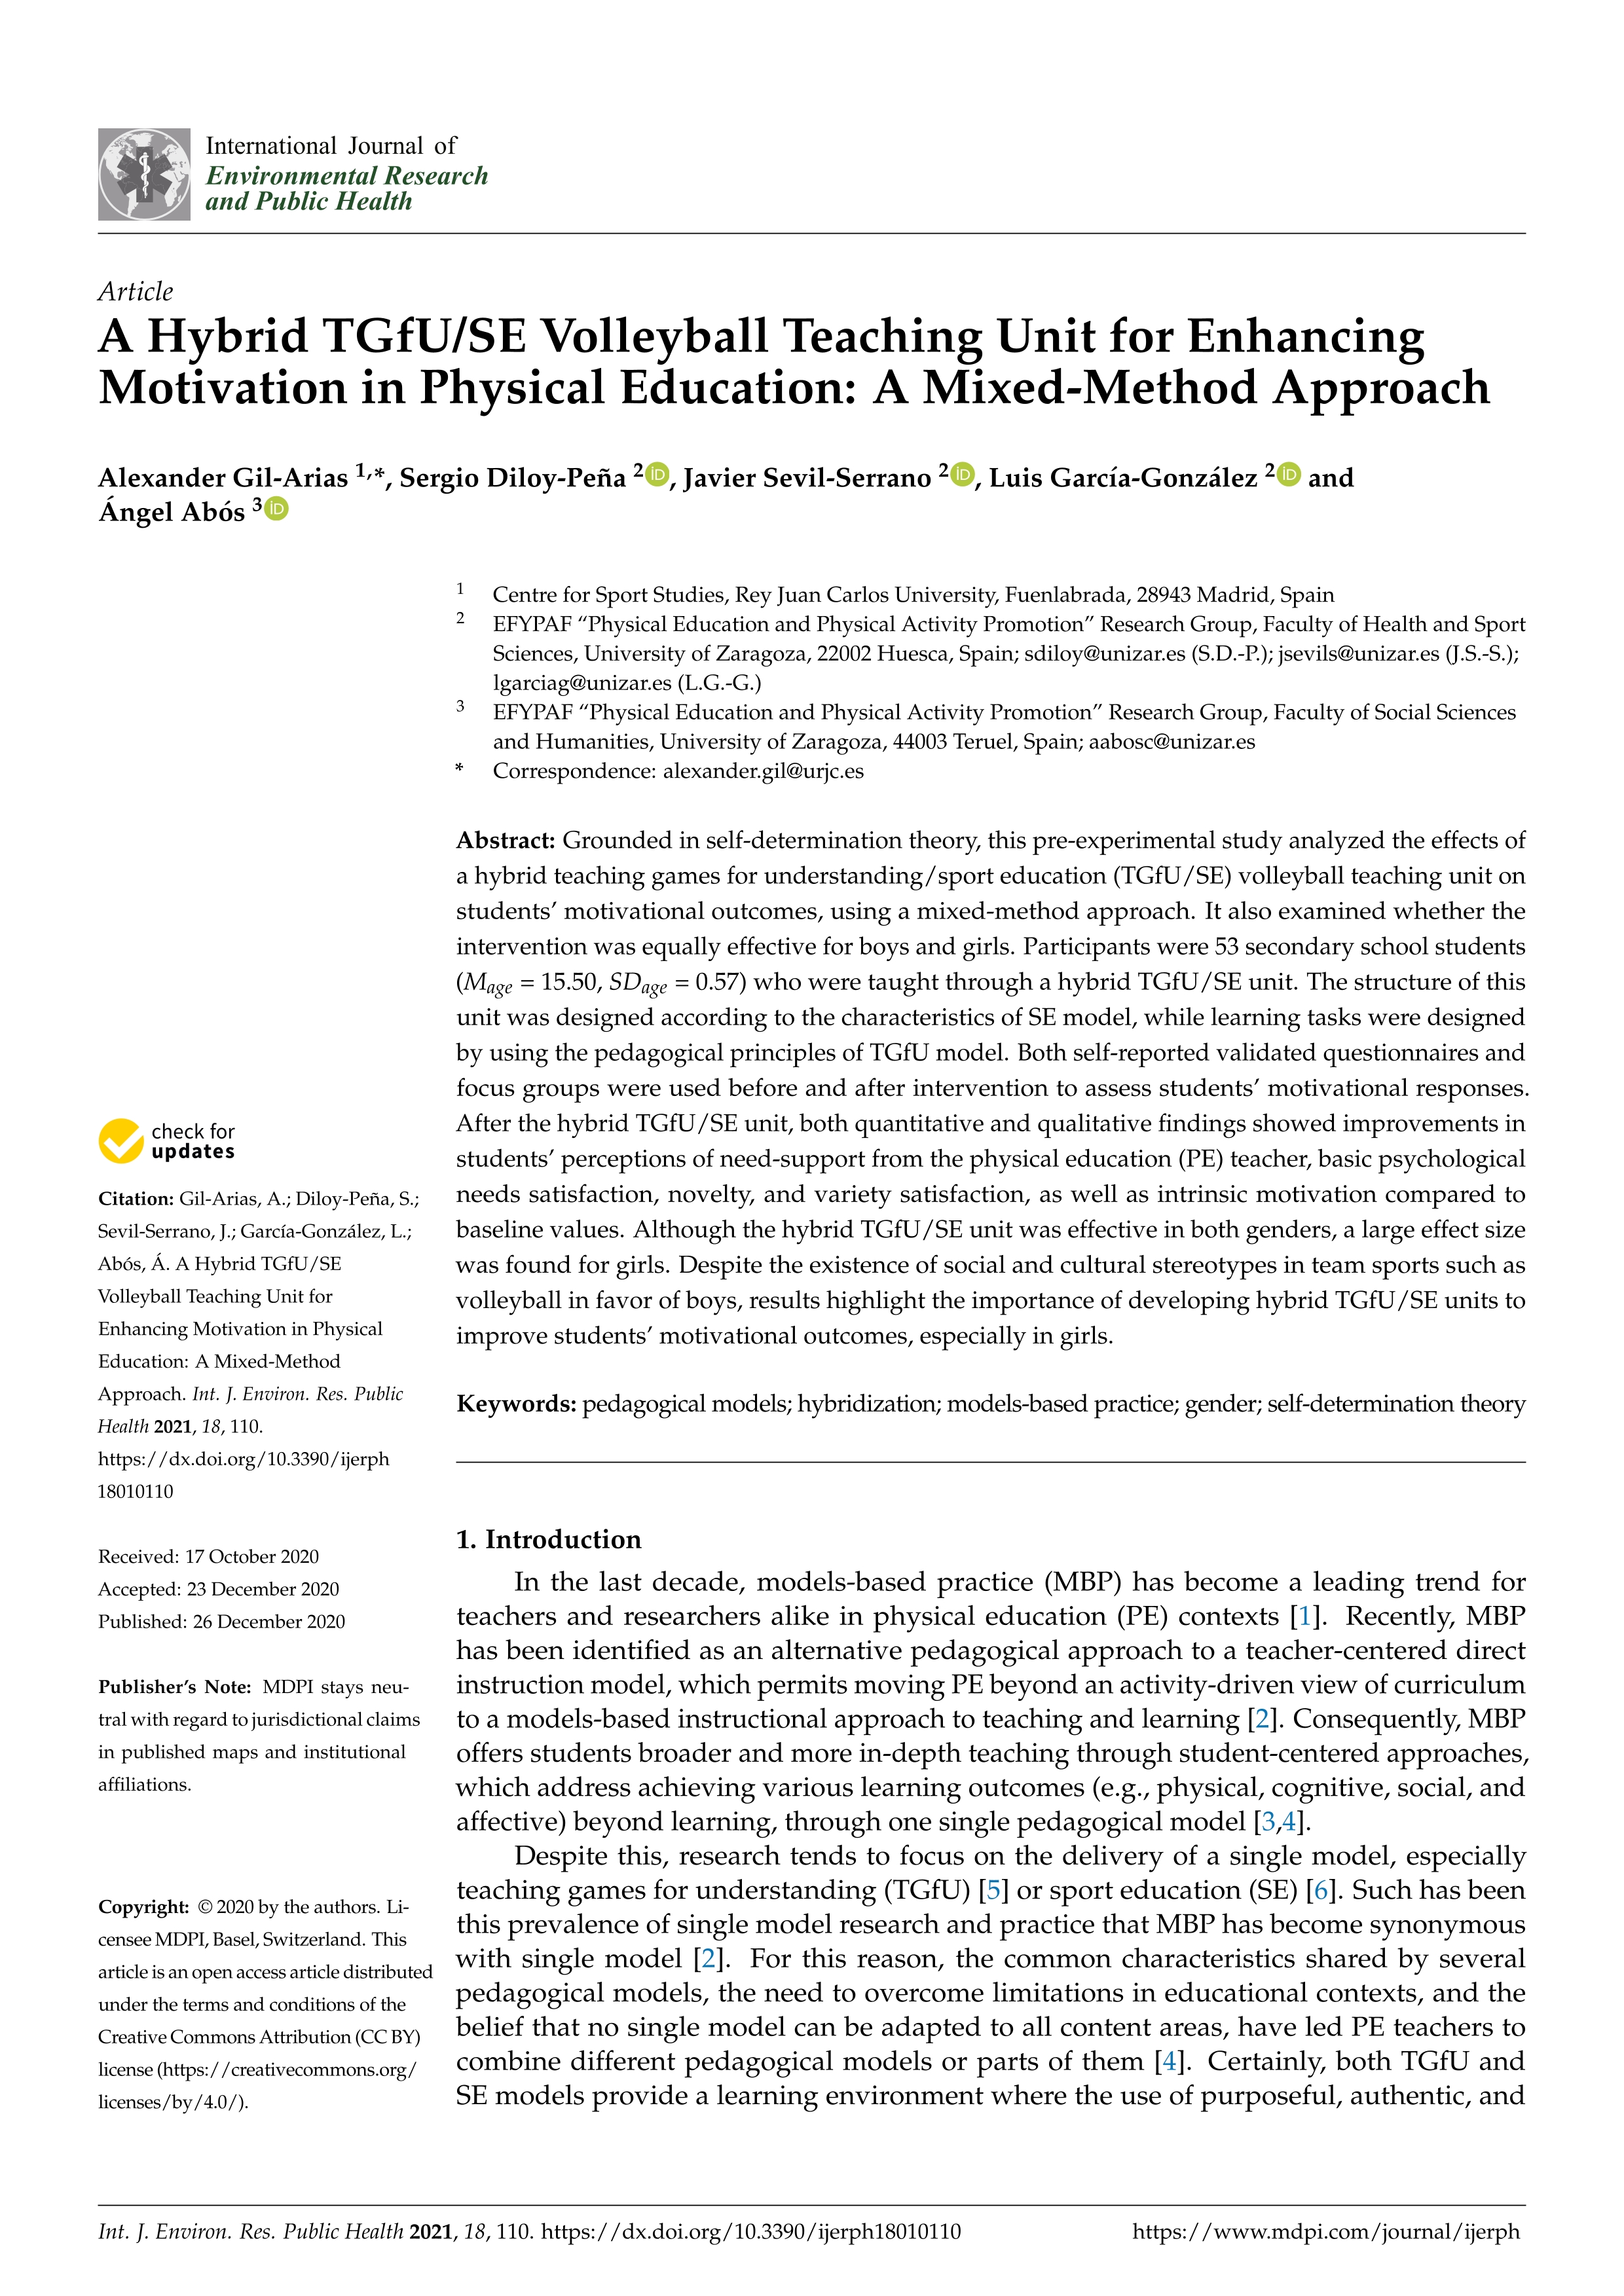 A hybrid tgfu/se volleyball teaching unit for enhancing motivation in physical education: A mixed-method approach